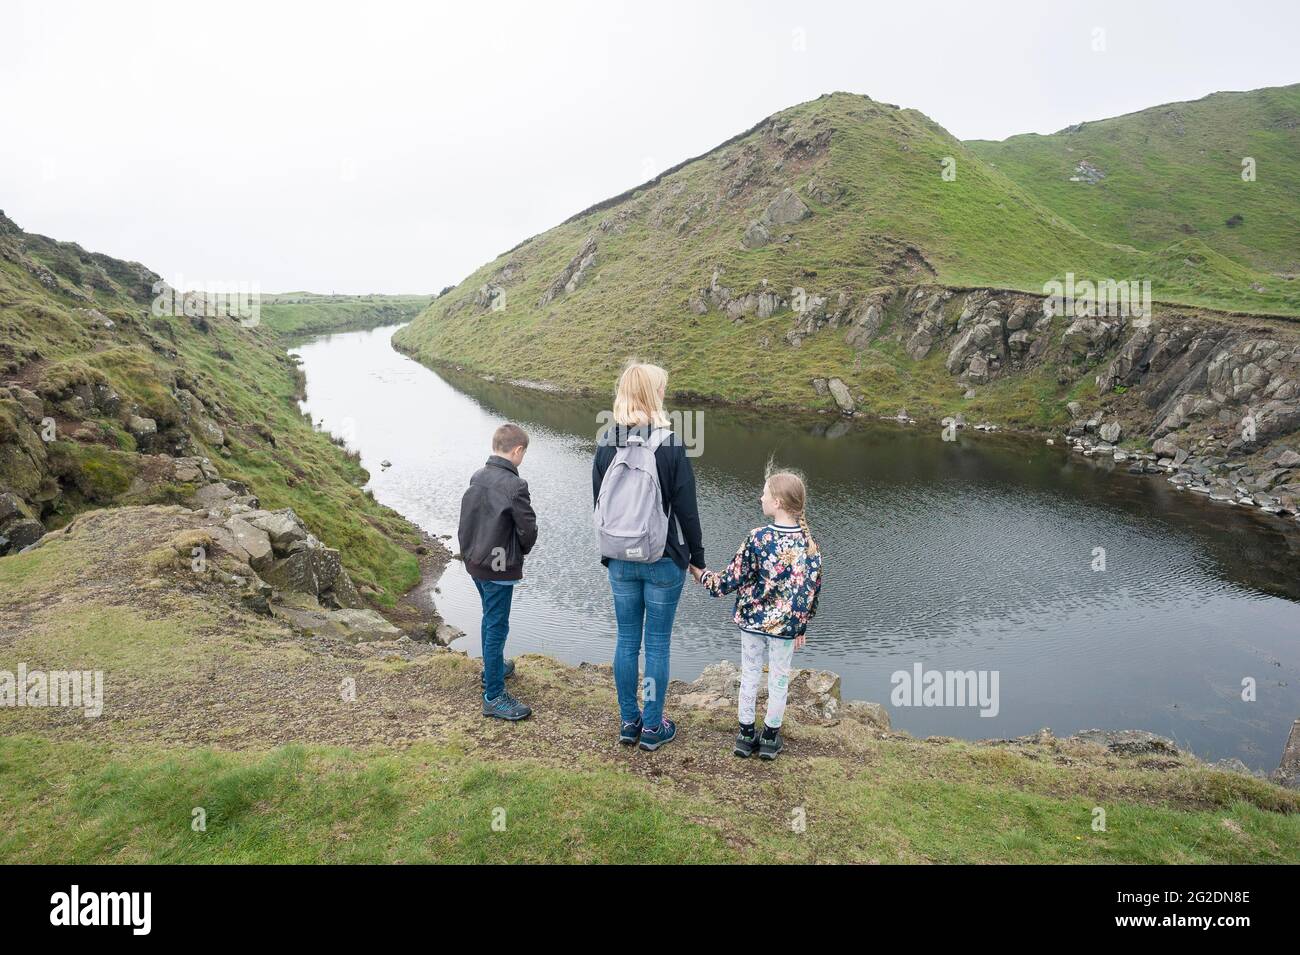 A mother stands with her kids looking at a body of water and hills in Shropshire England Stock Photo